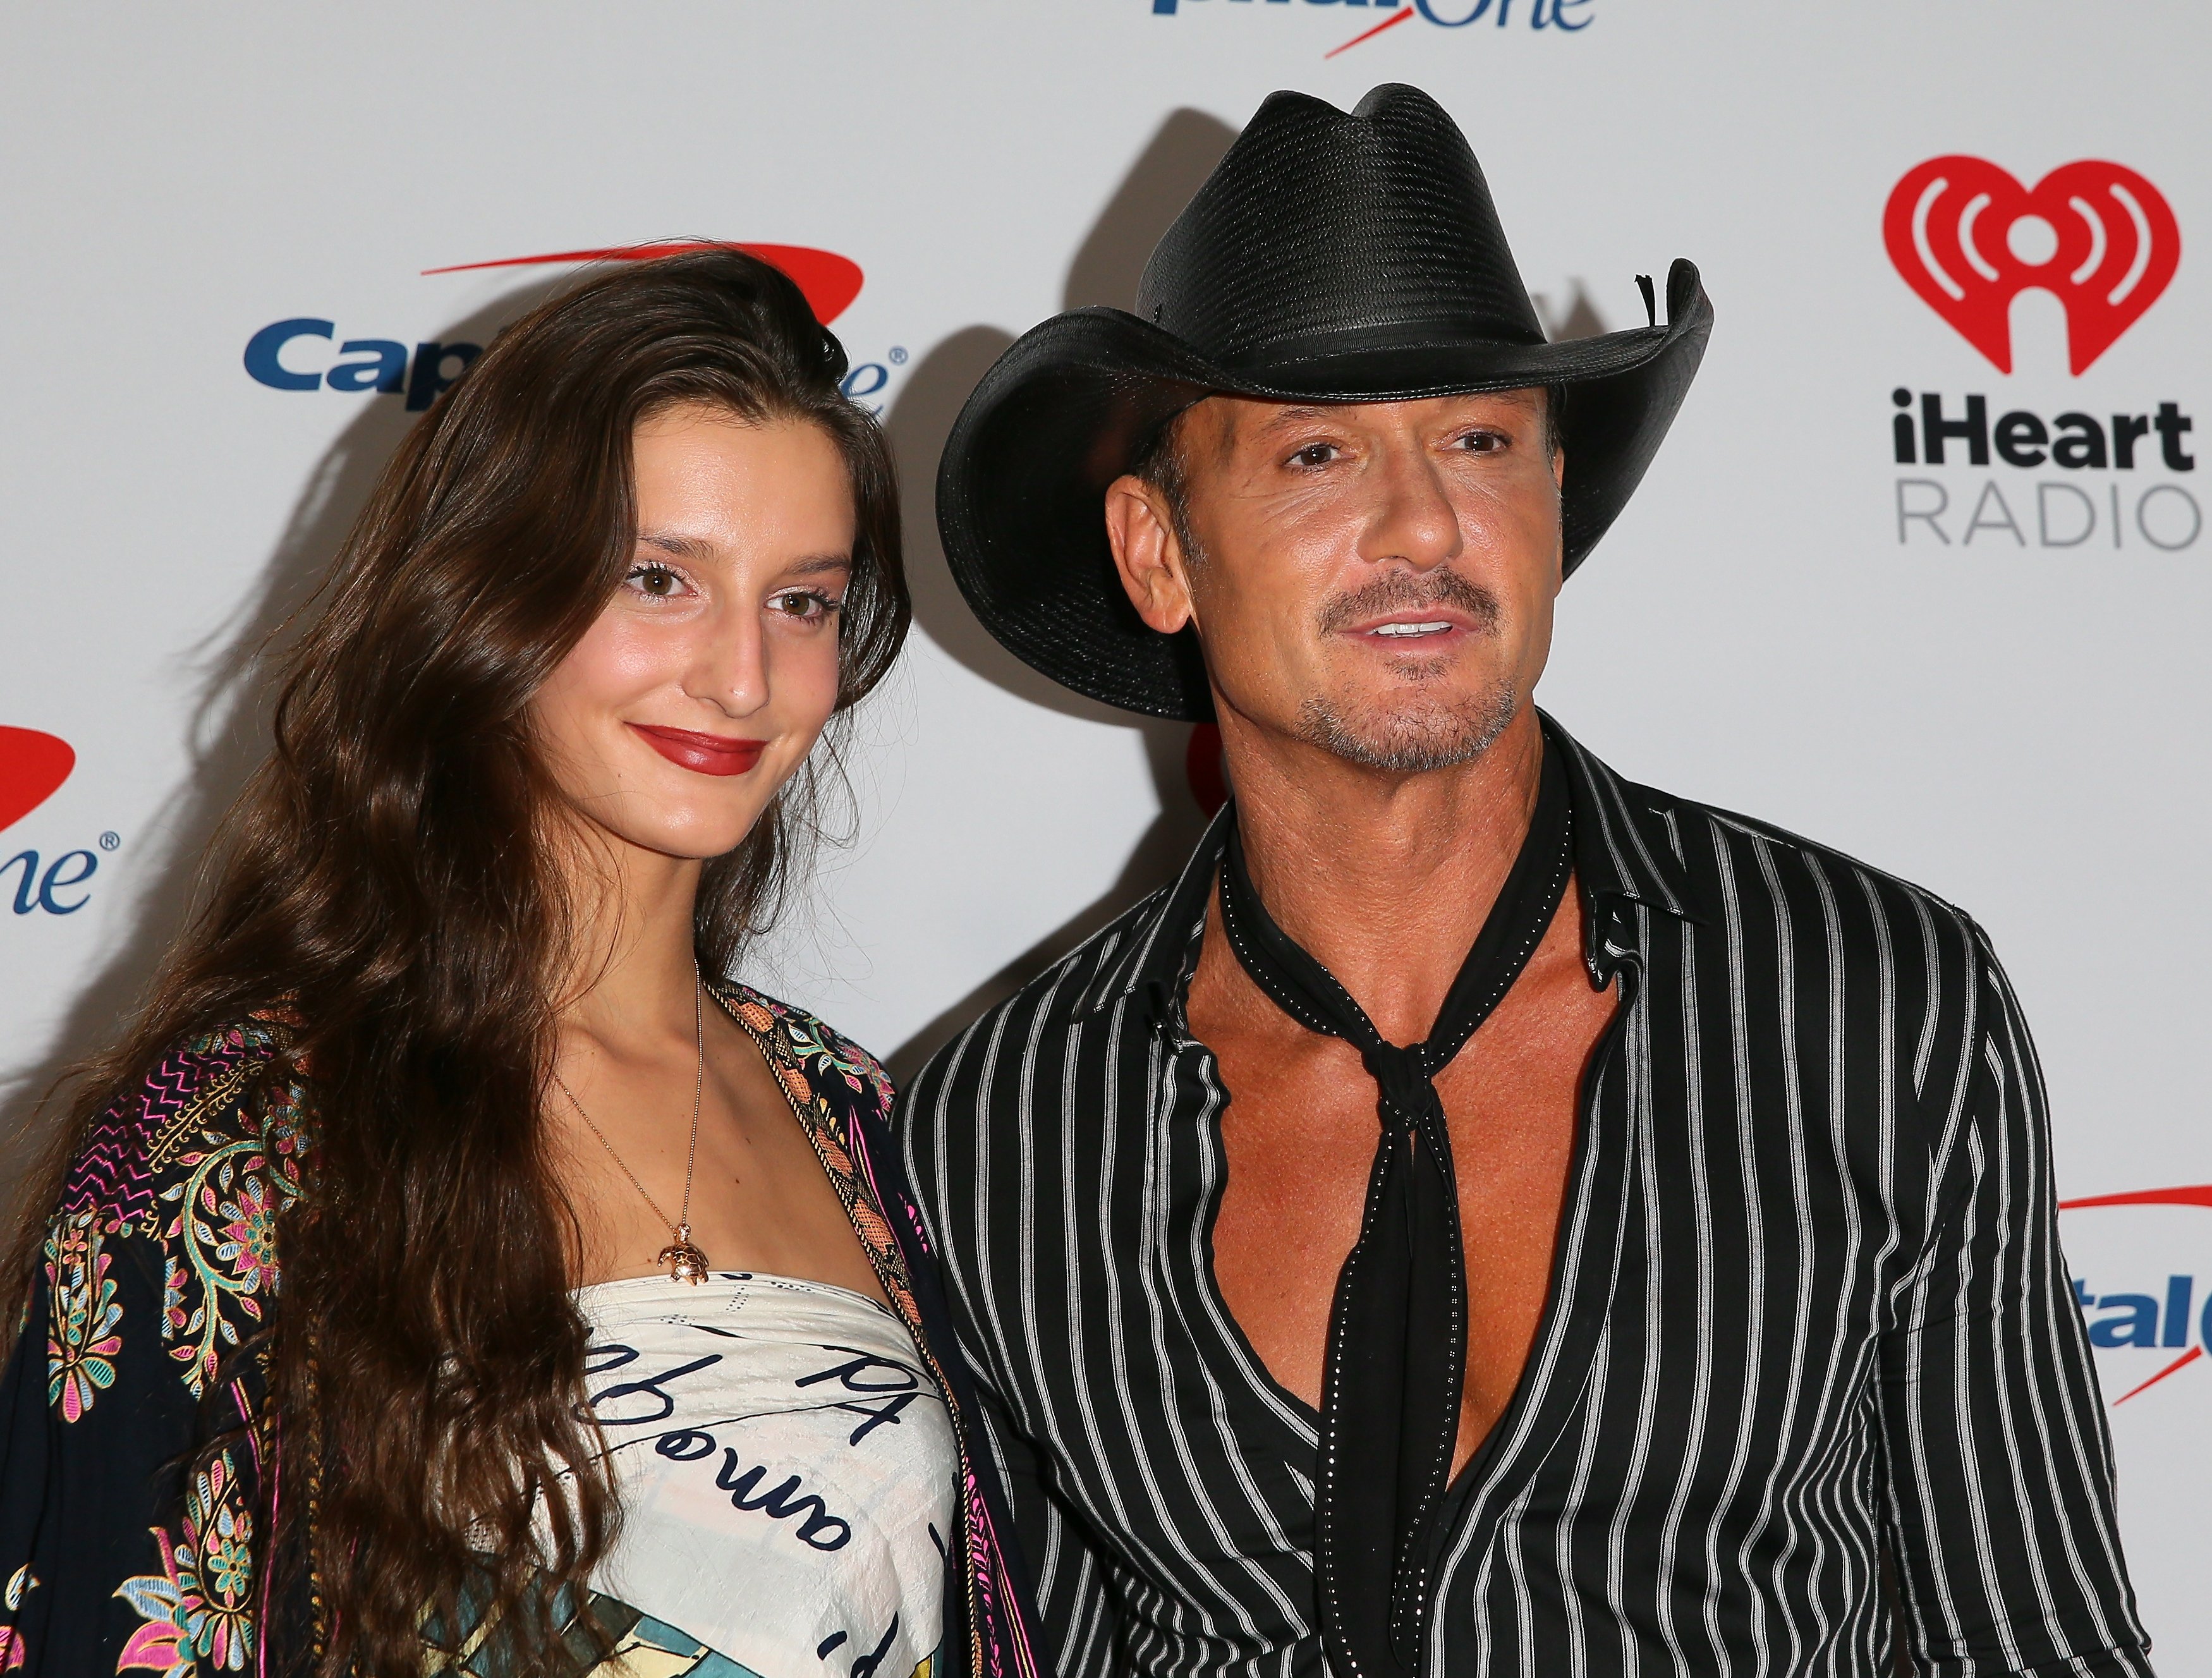 Audrey Caroline McGraw and Tim McGraw attend the 2019 iHeartRadio Music Festival at T-Mobile Arena on September 20, 2019 in Las Vegas, Nevada. | Source: Getty Images